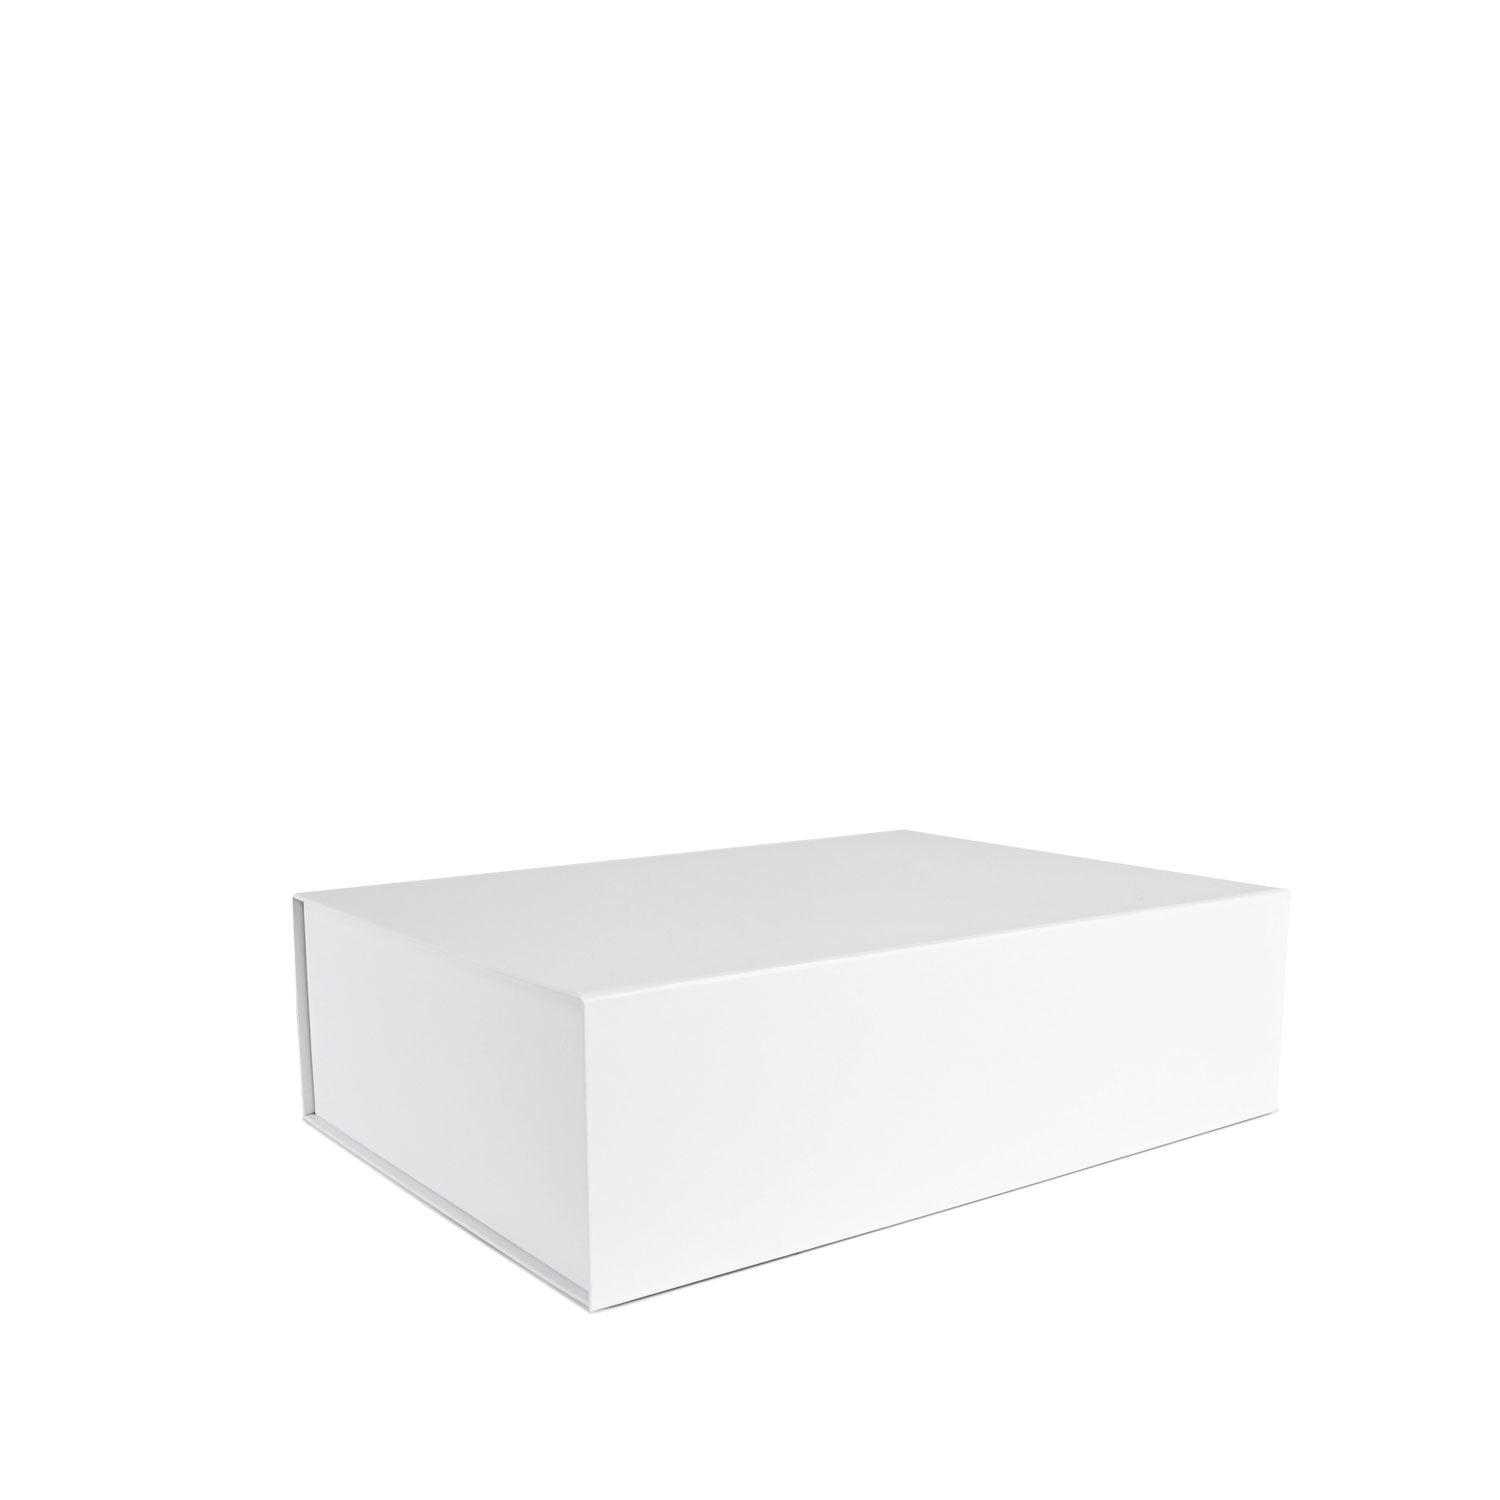 High Quality White Extra Large Gift Box - NEON Packaging